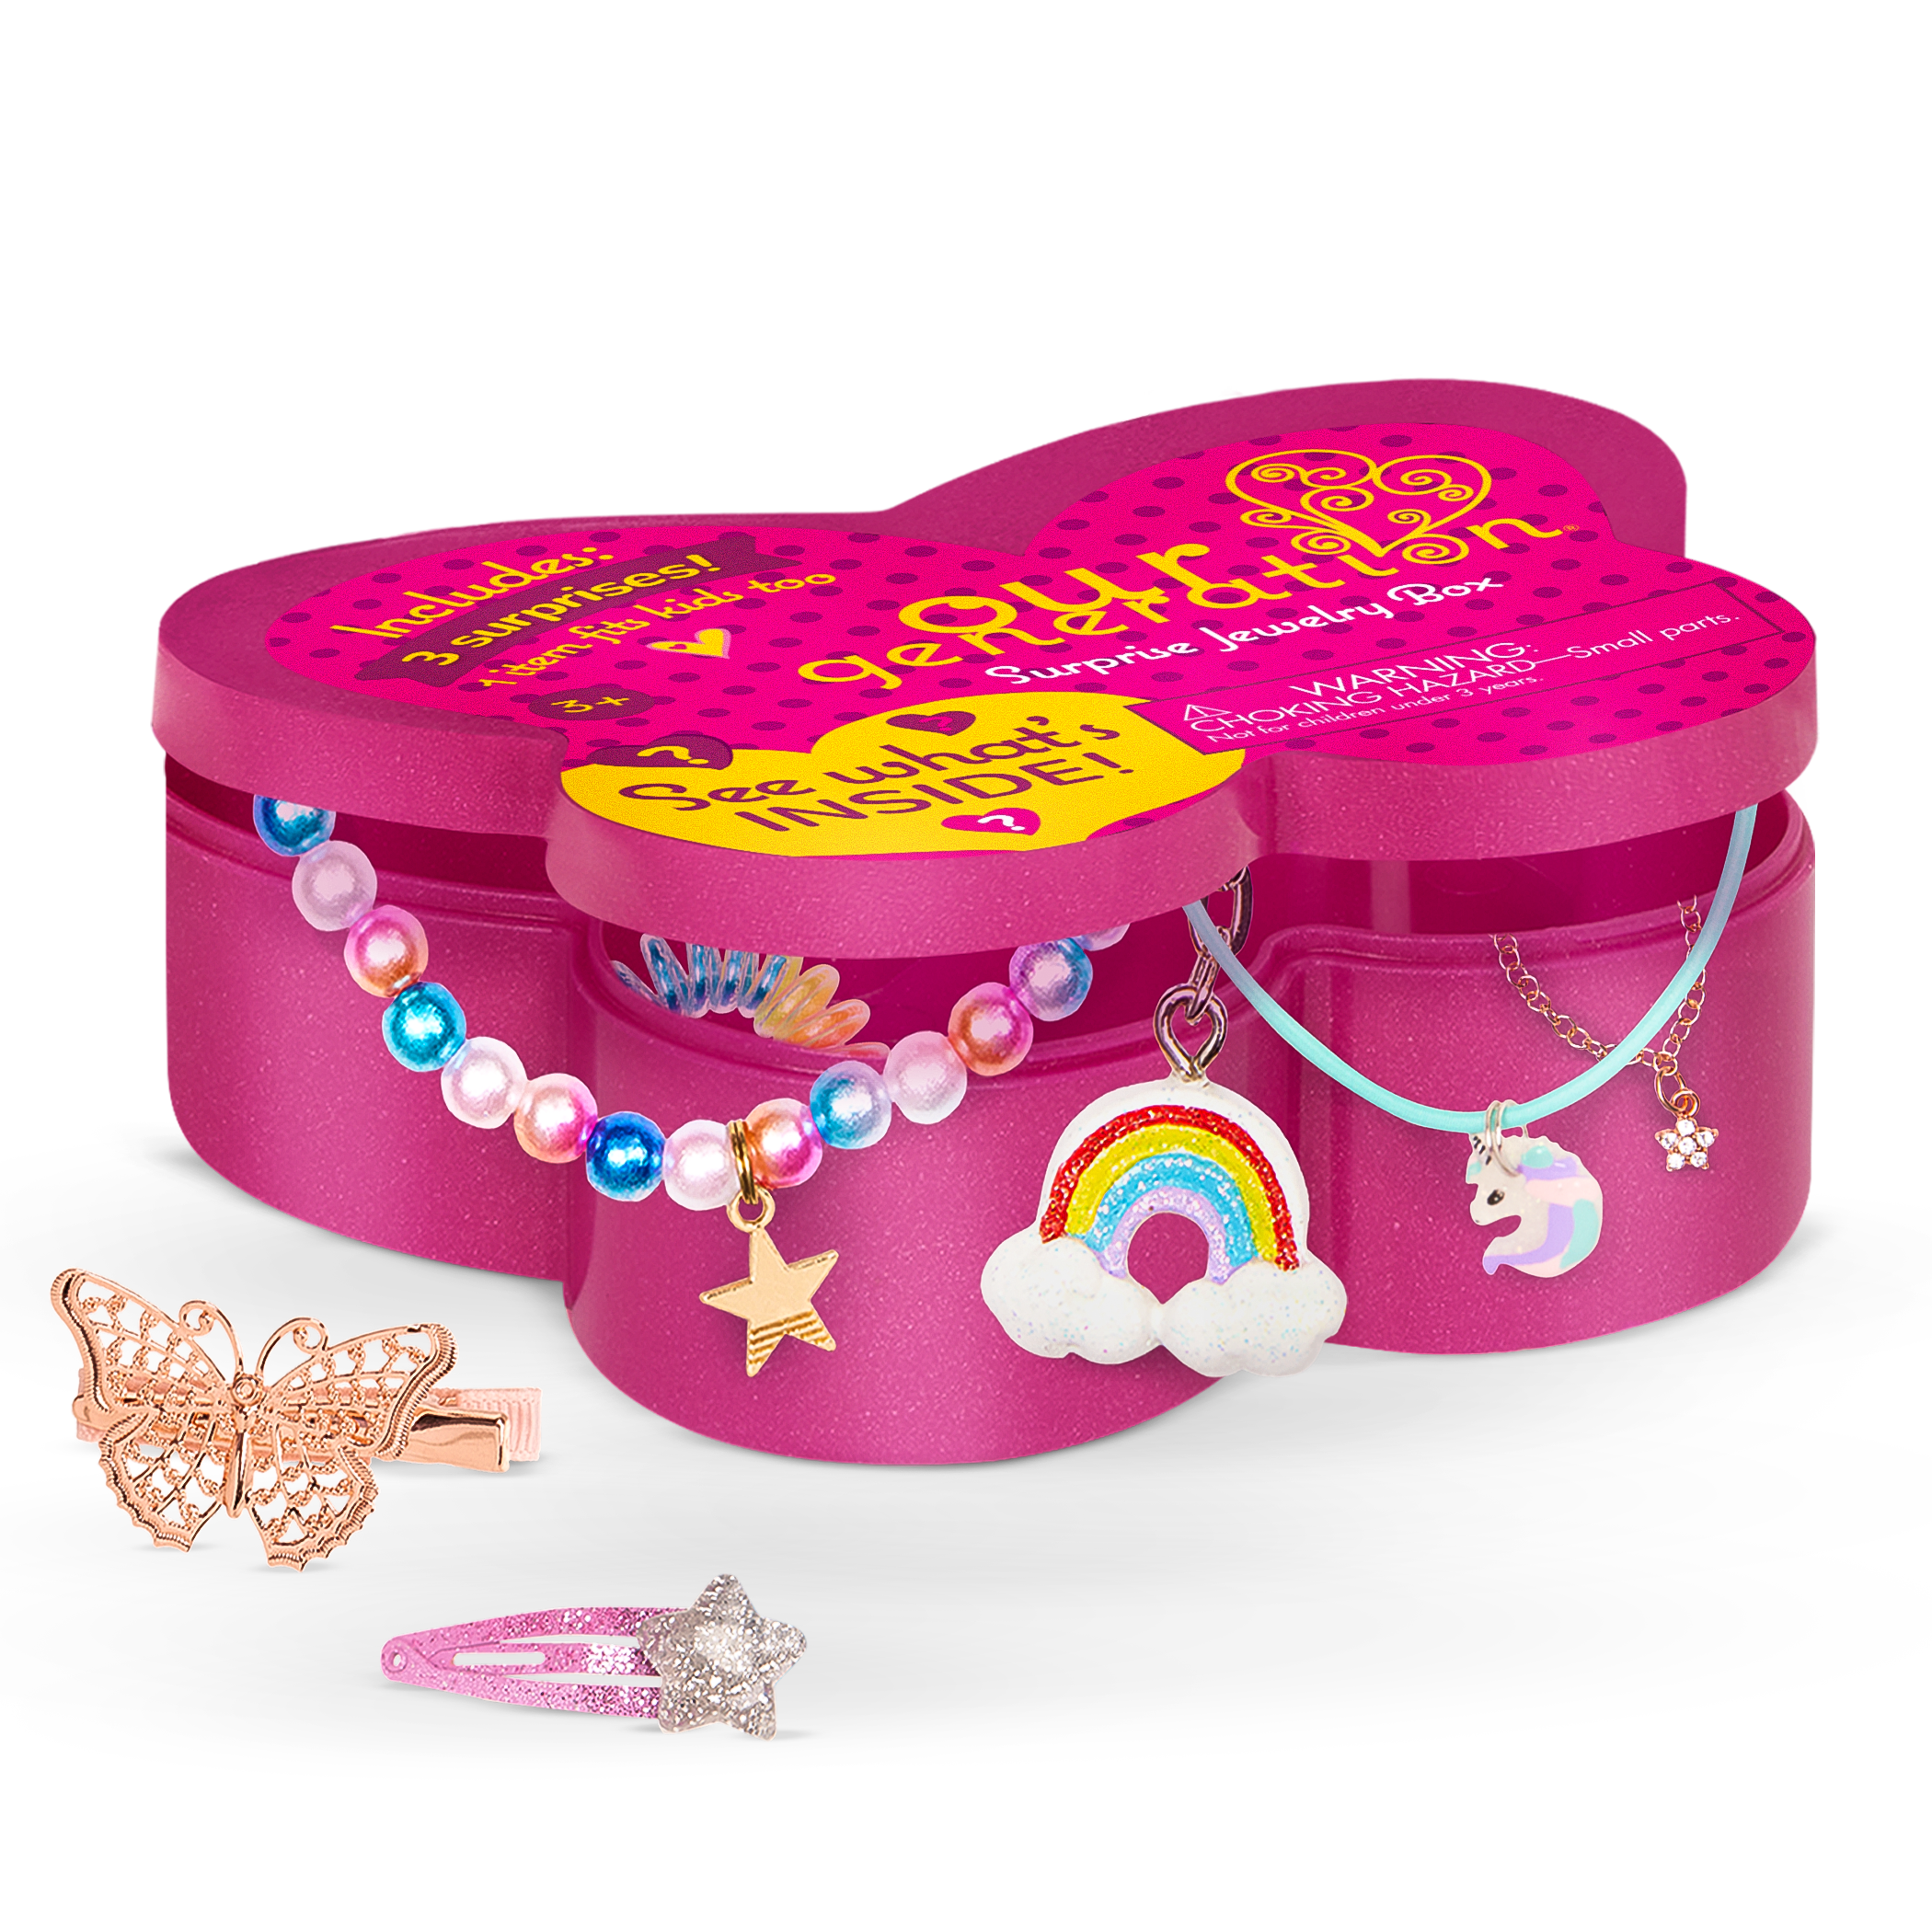 Our Generation Surprise Jewelry Box Accessory Set for 18-inch Dolls 